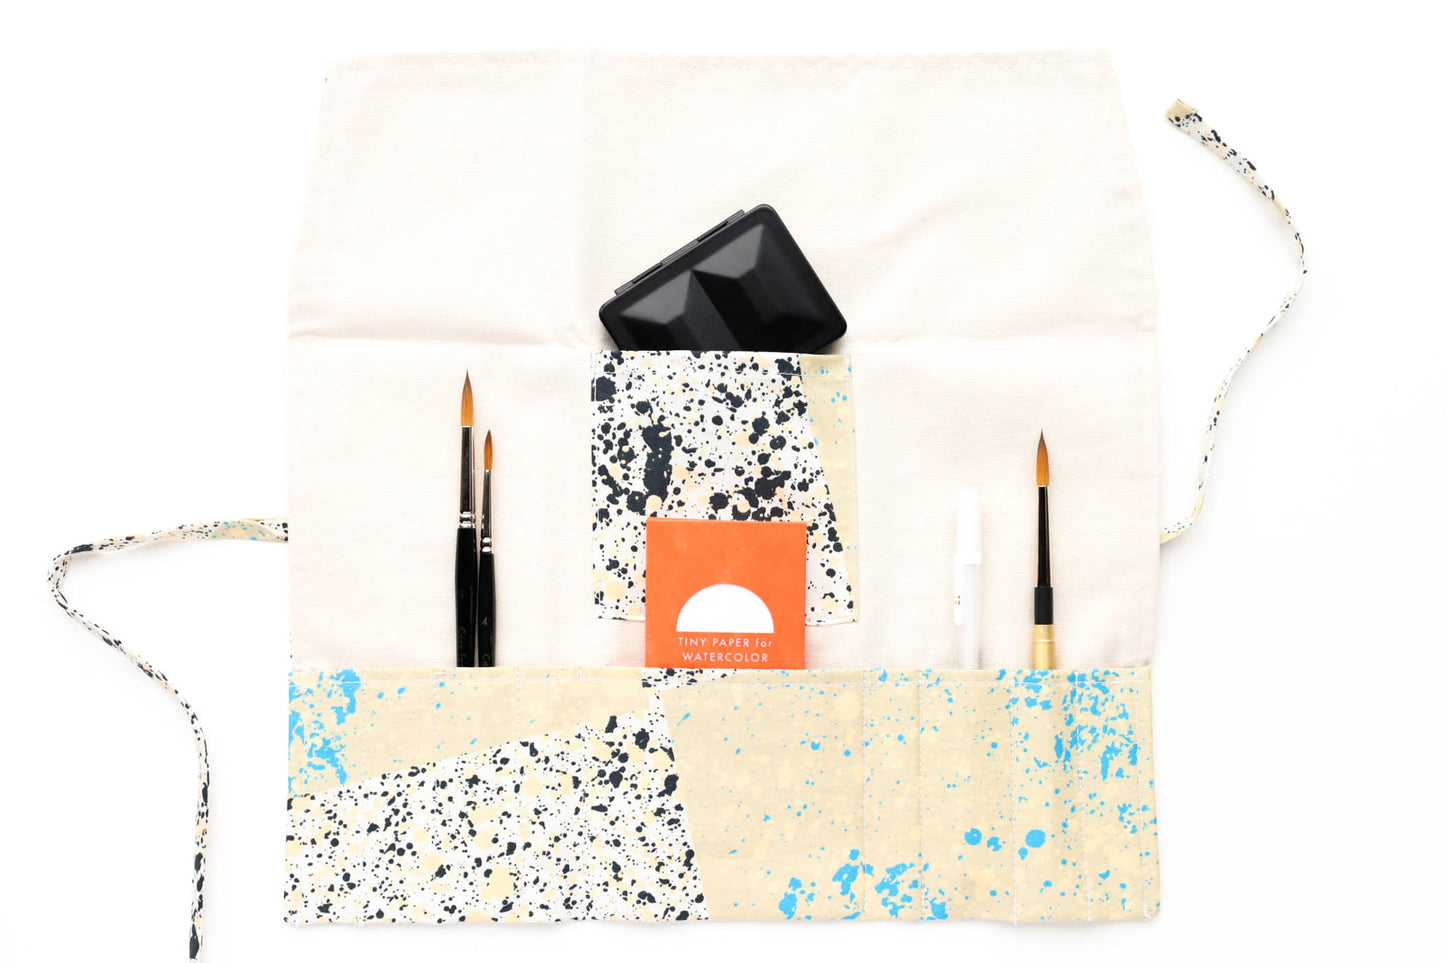 The open Terrasse pattern brush roll shown with a sampling of brushes, a simple travel palette, and a tiny paper pack.